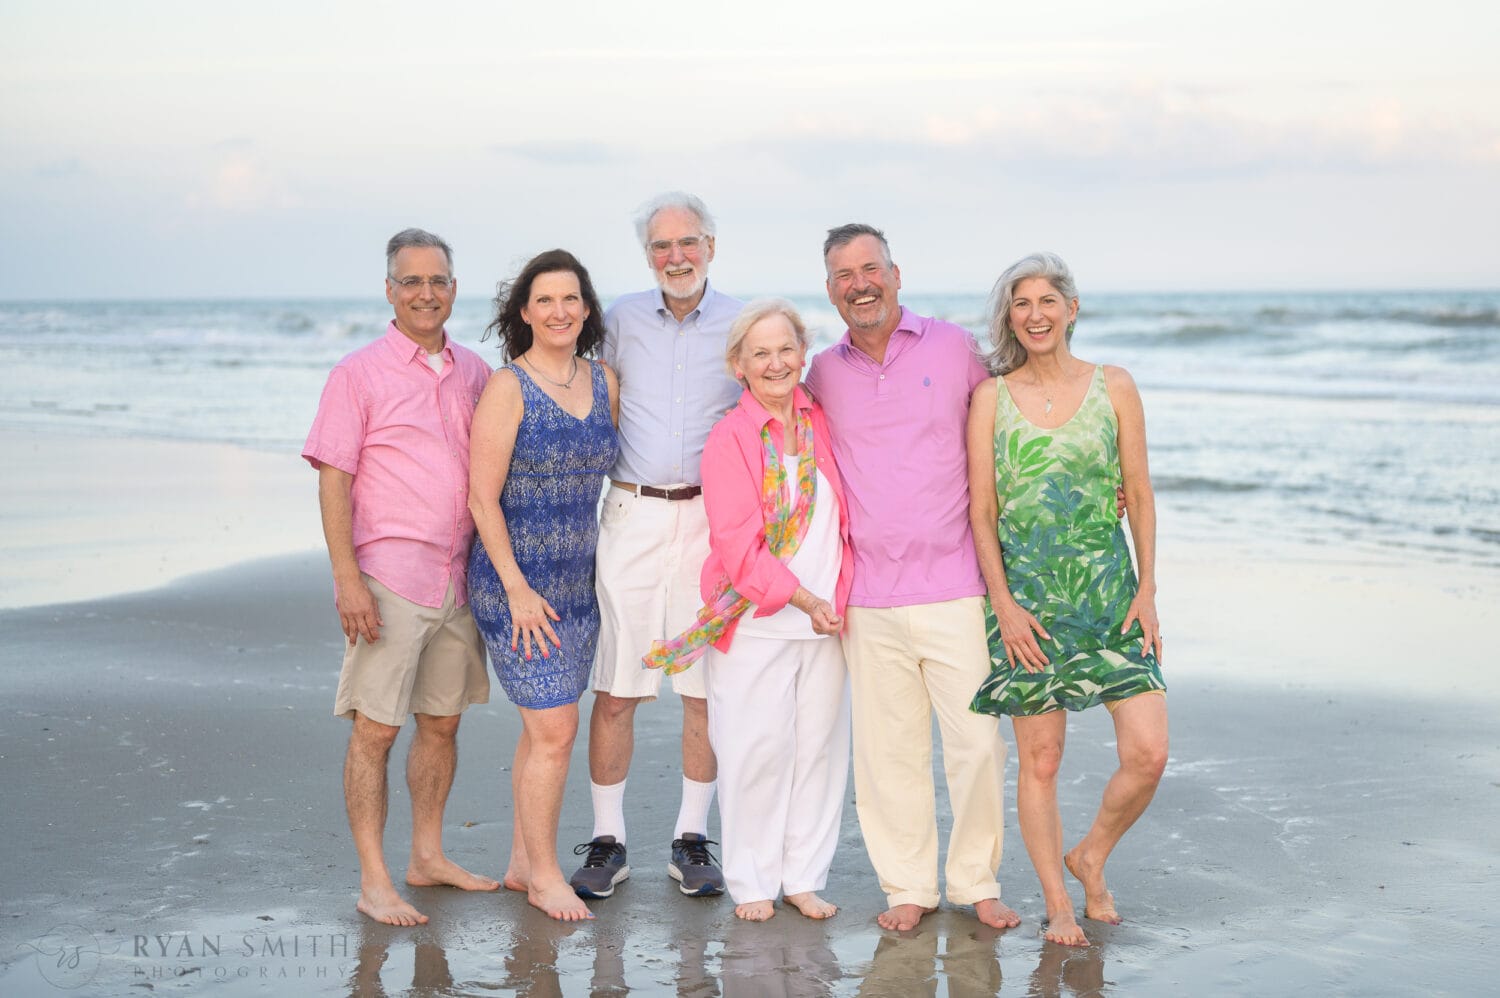 Large family group having fun by the ocean - North Myrtle Beach